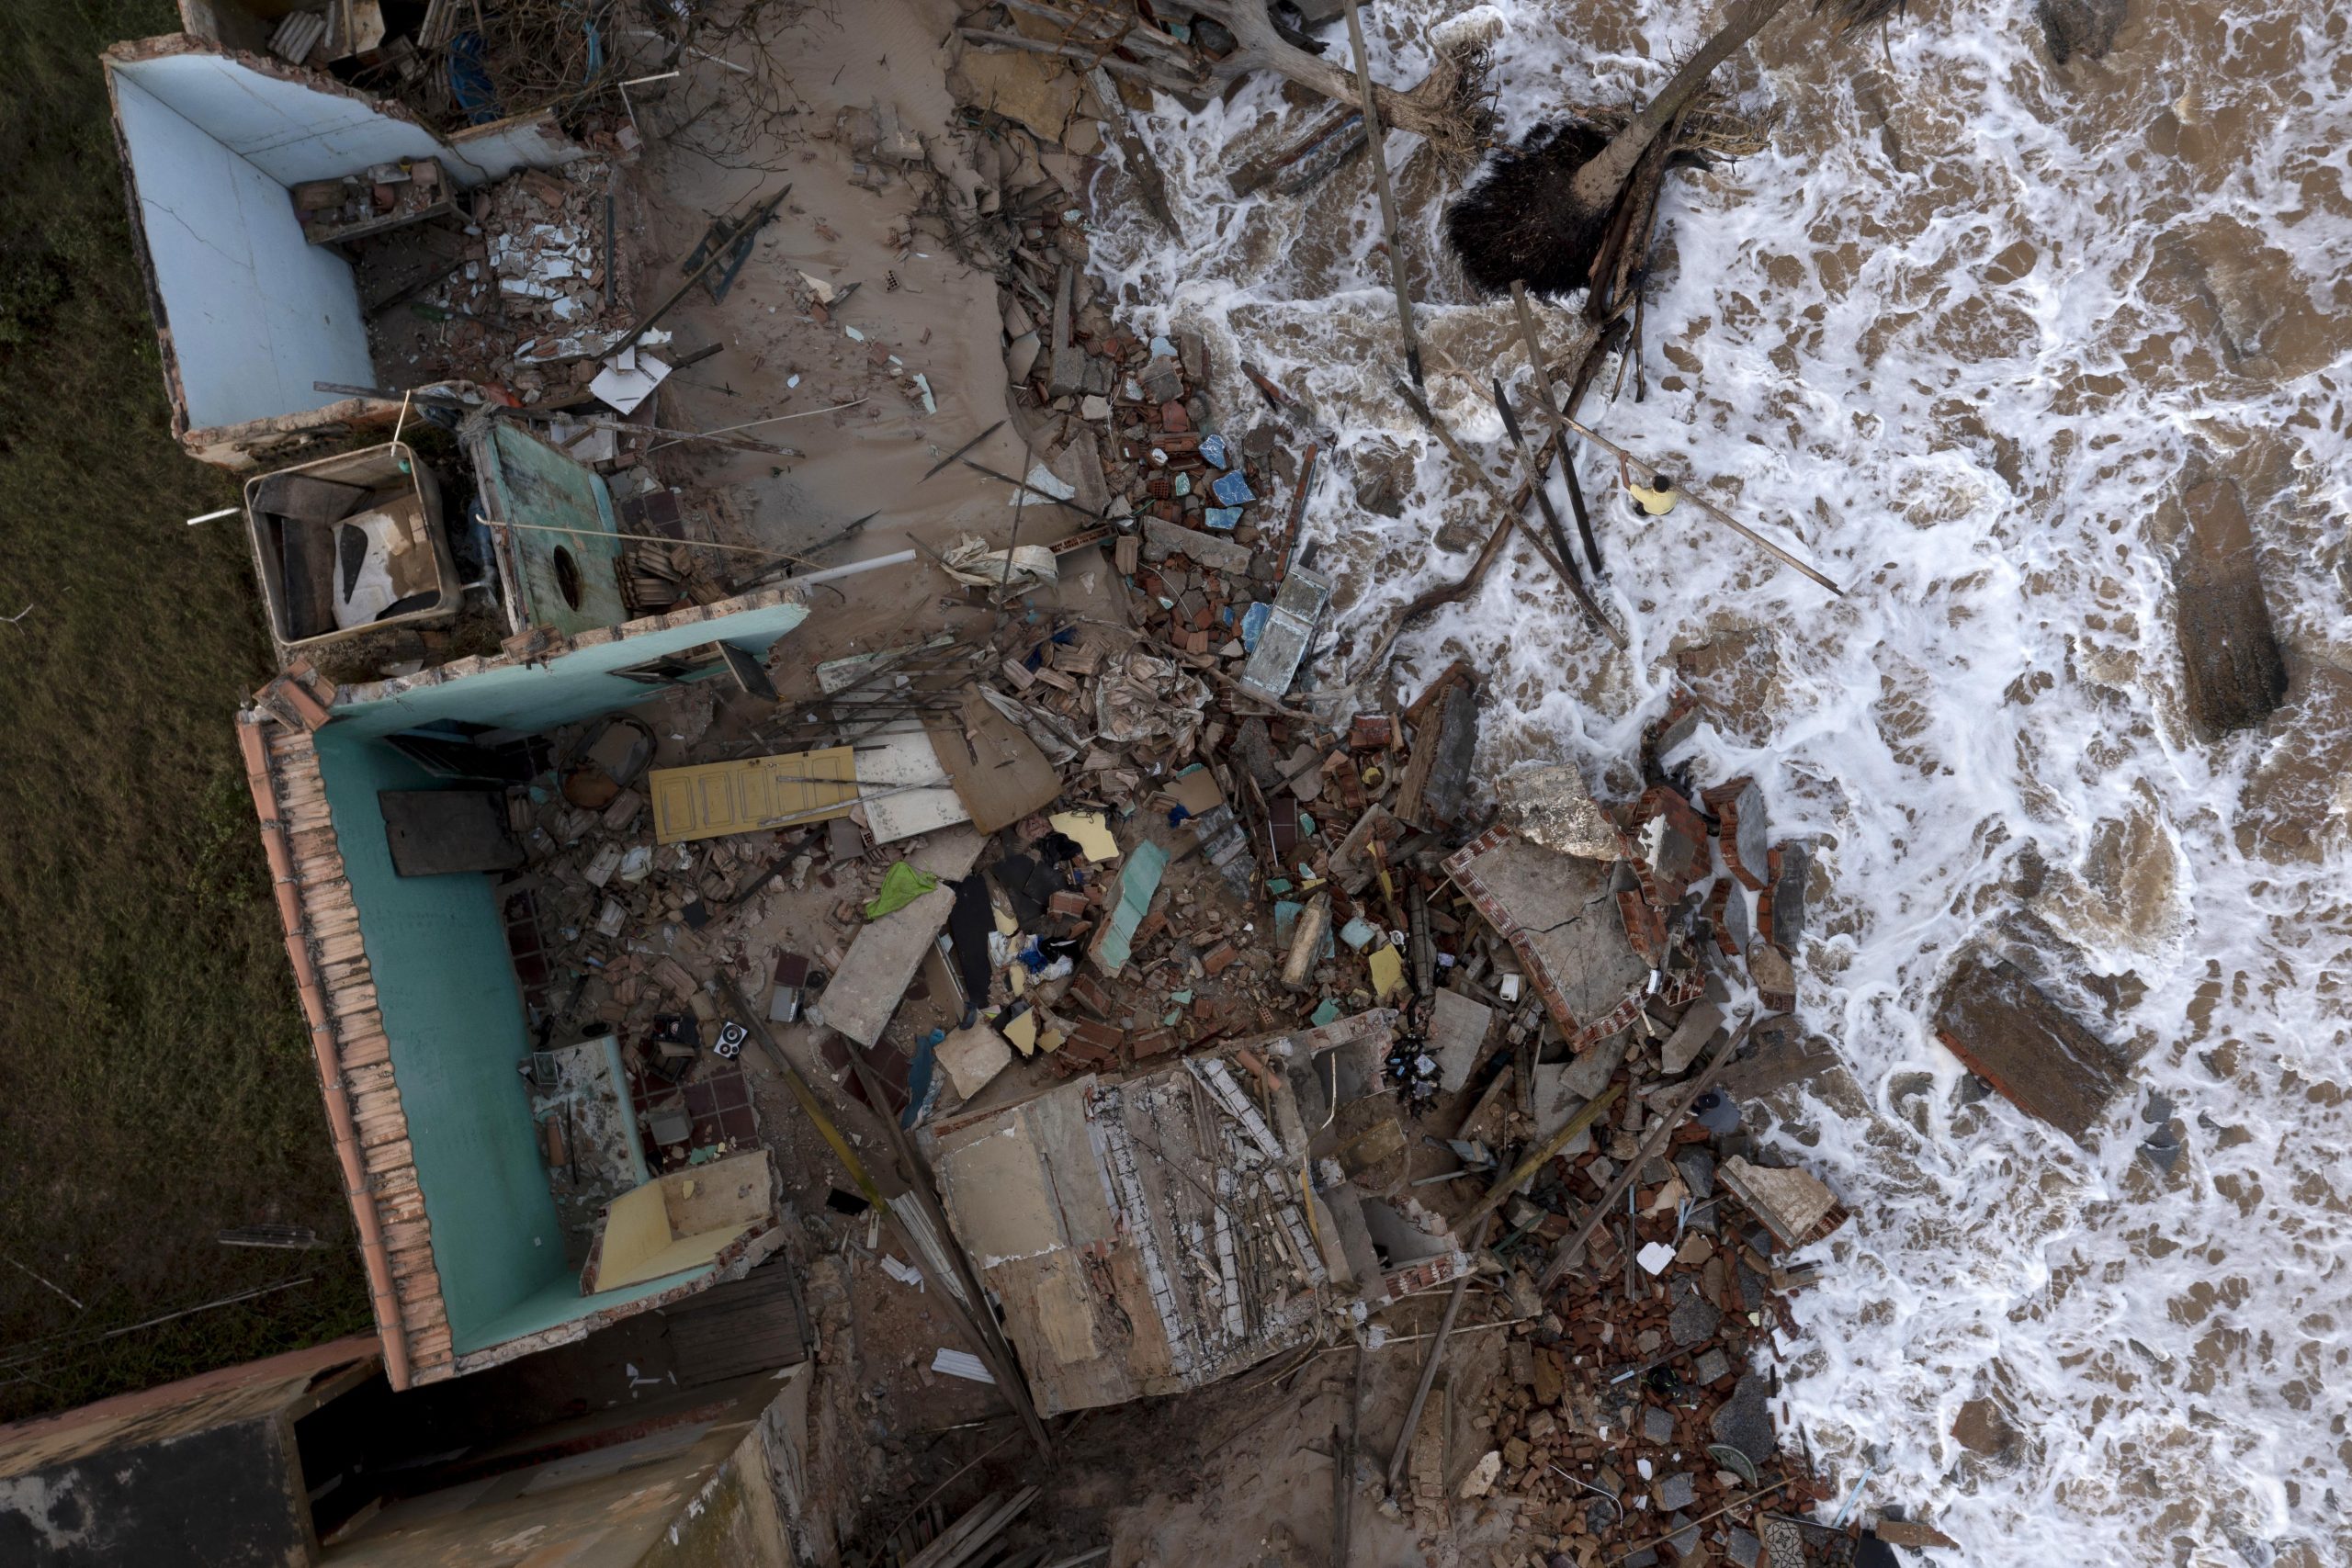 The devastated Brazilian resort town is slowly sinking into the ocean